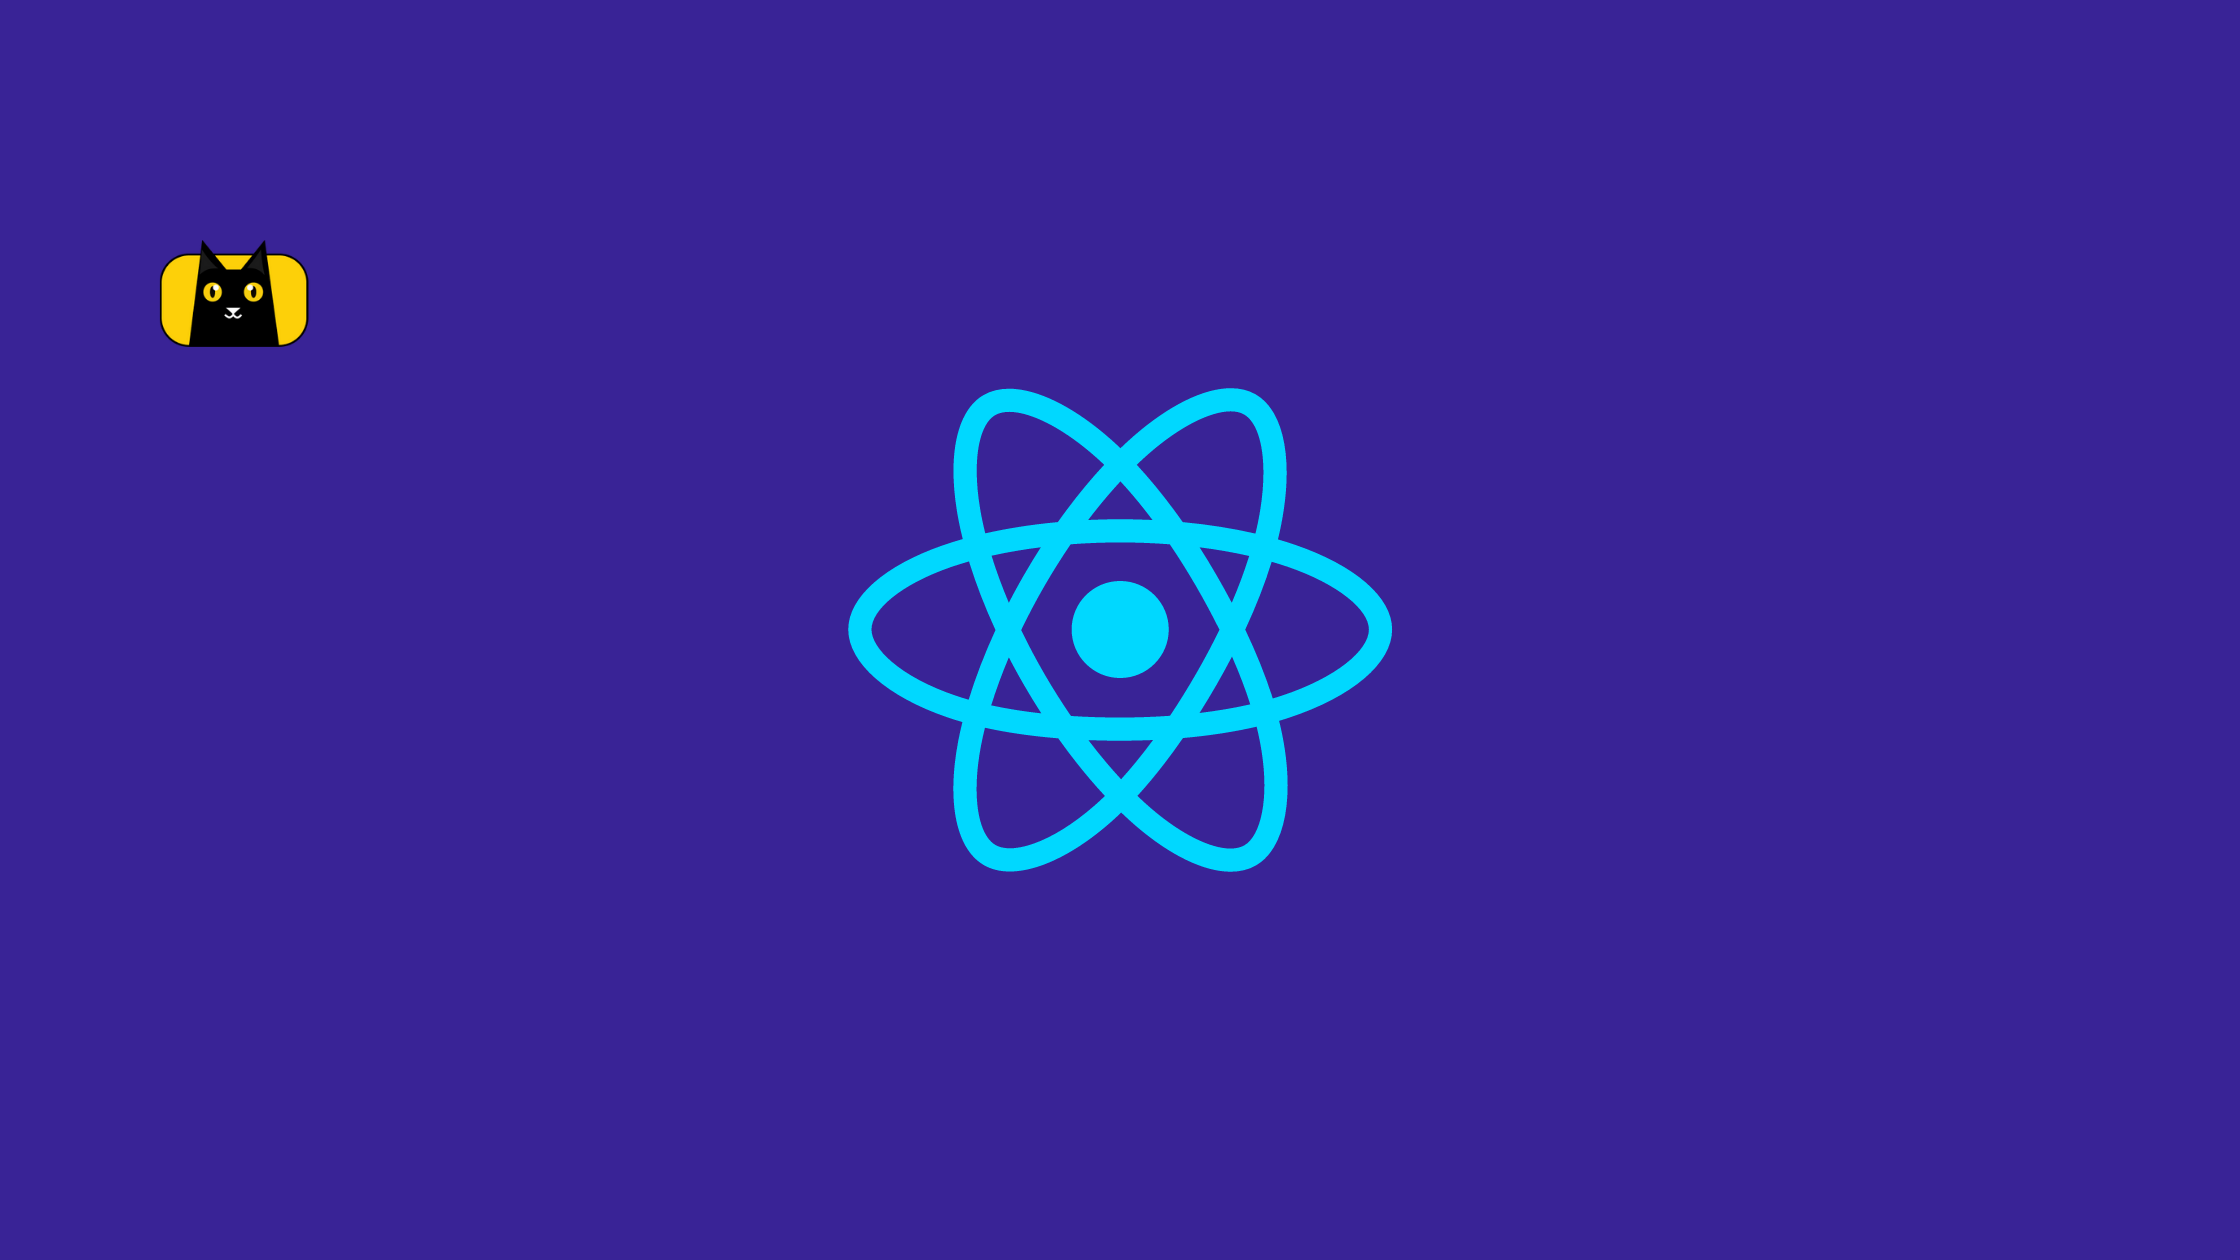 A picture of a React logo and a CopyCat logo.